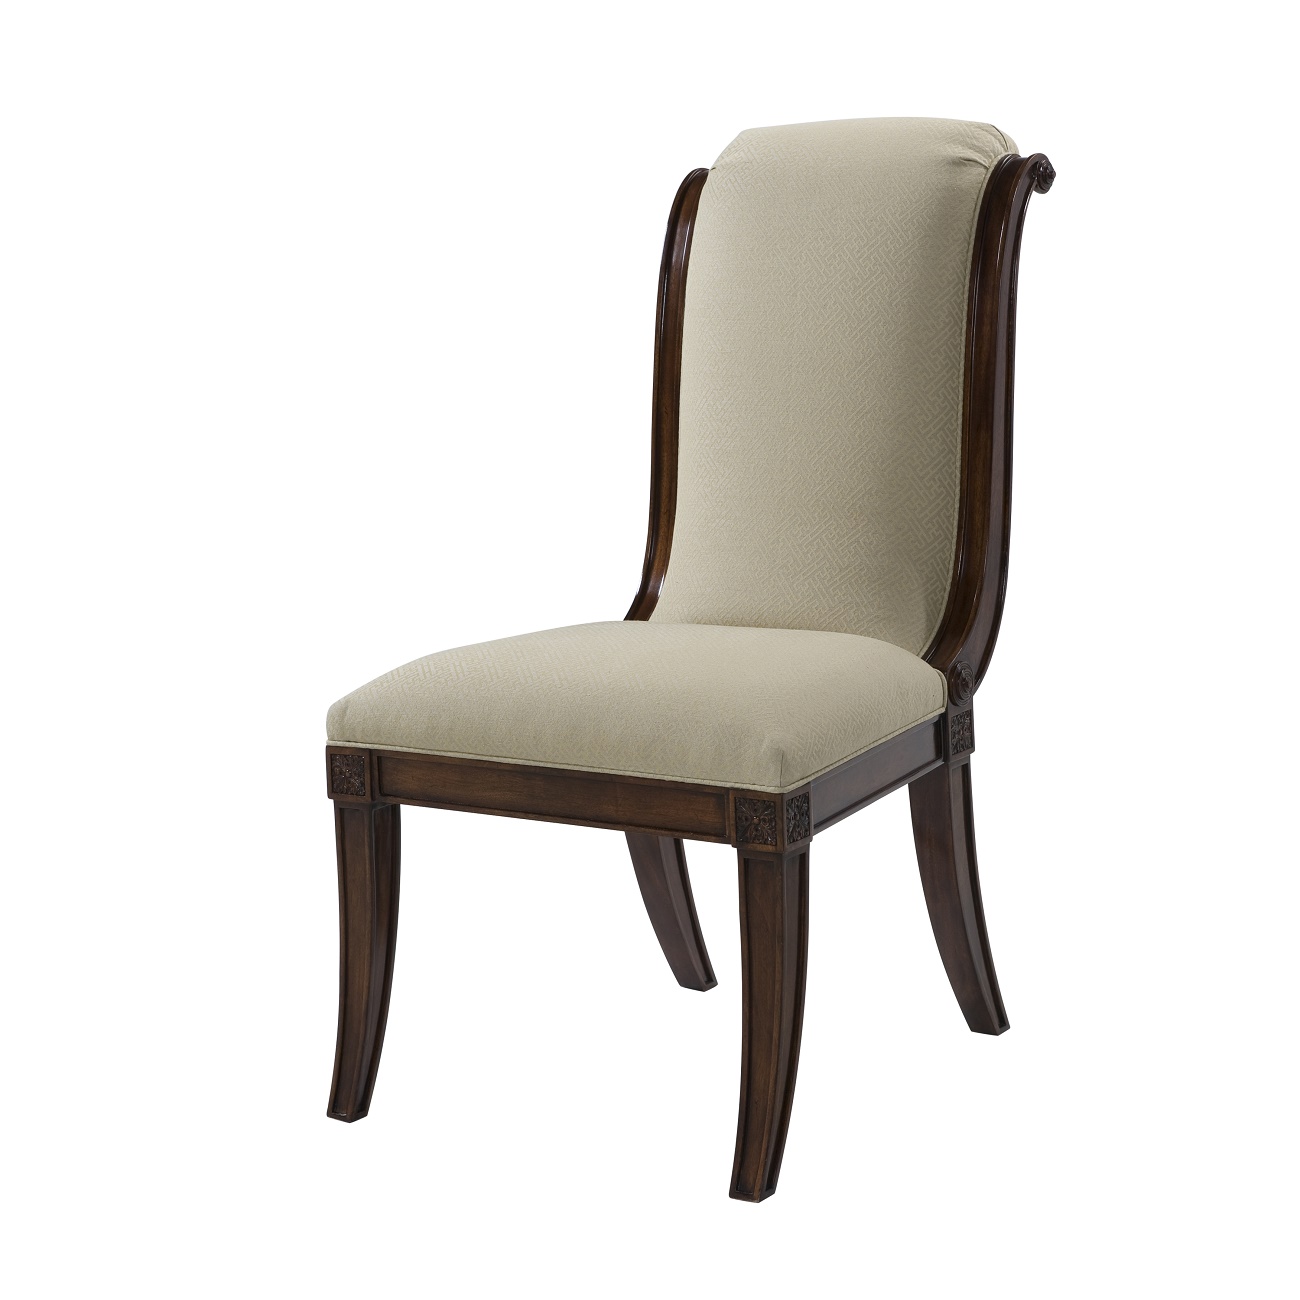 Theodore Alexander, Gabrielle Chair, Side Chairs on Sale, Brooklyn, Accentuations Brand